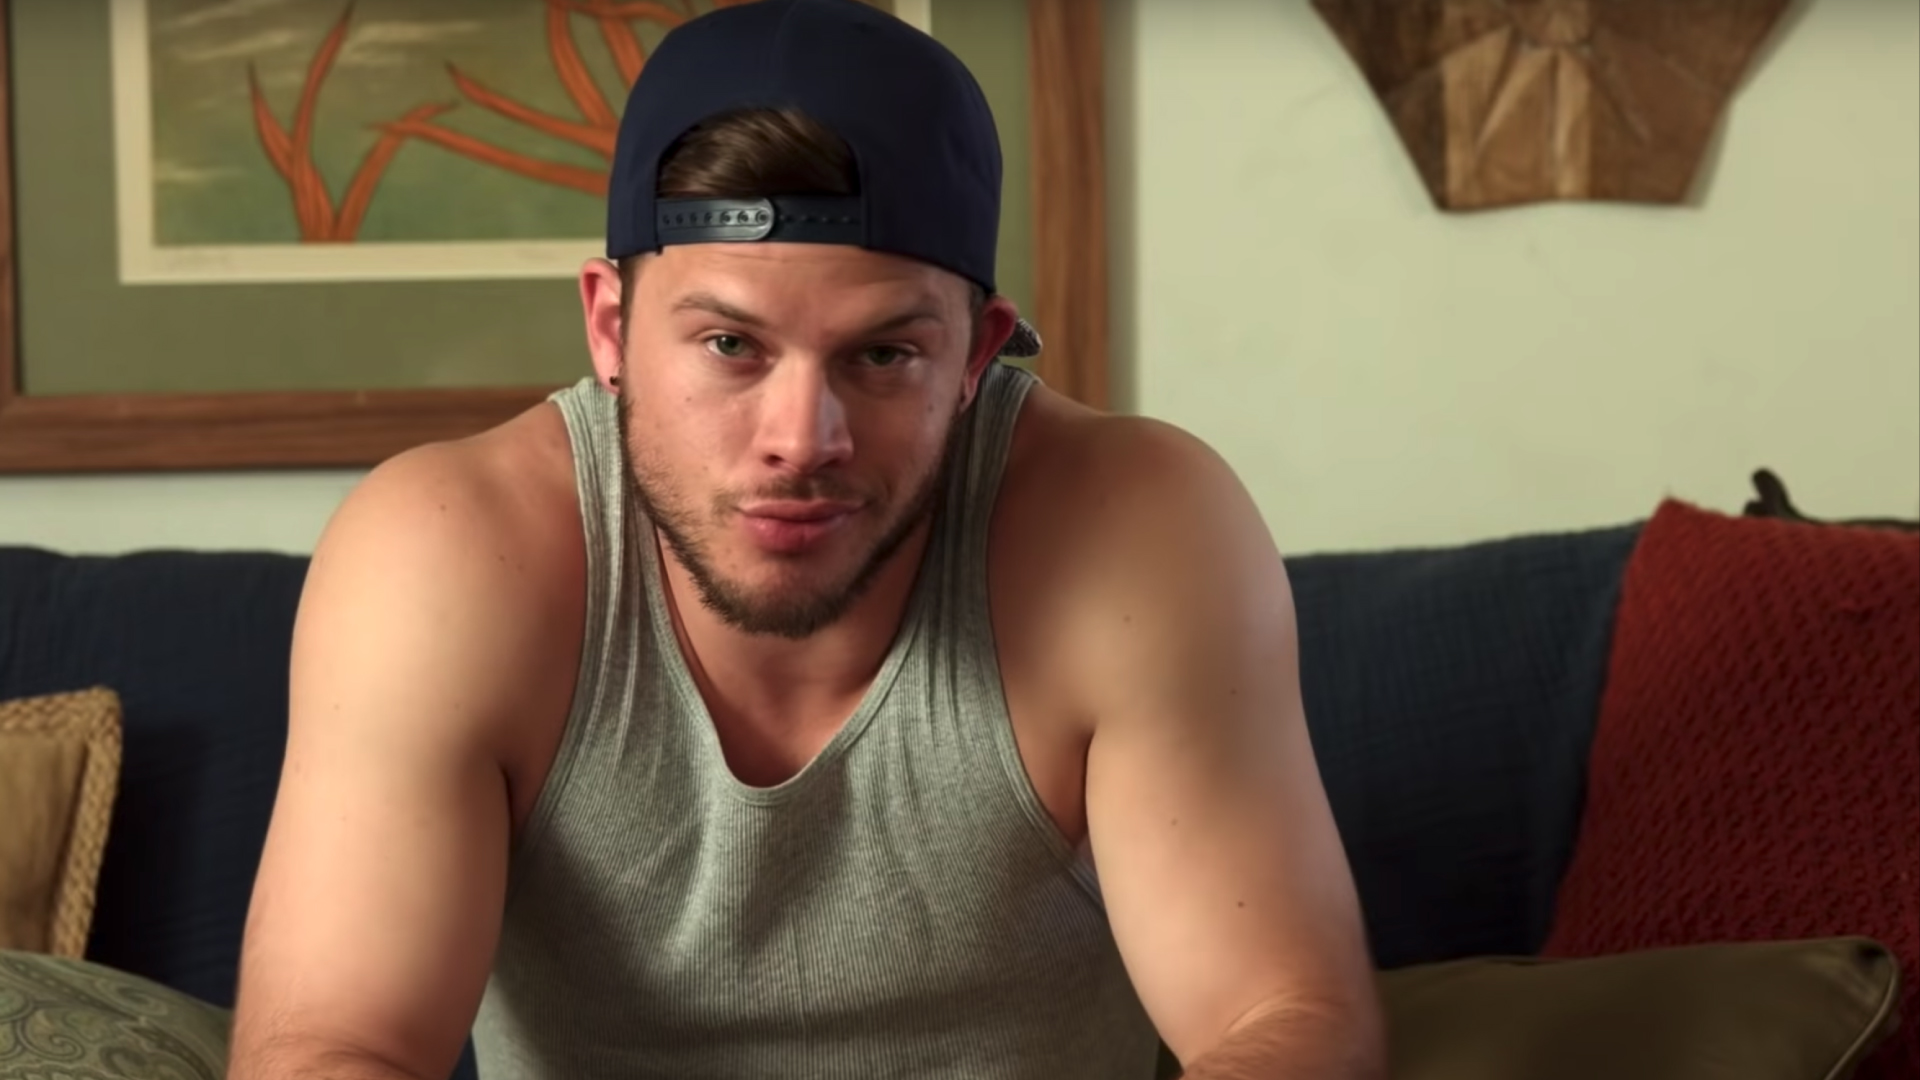 The Real Bros of Simi Valley, from American Vandal star Jimmy Tatro